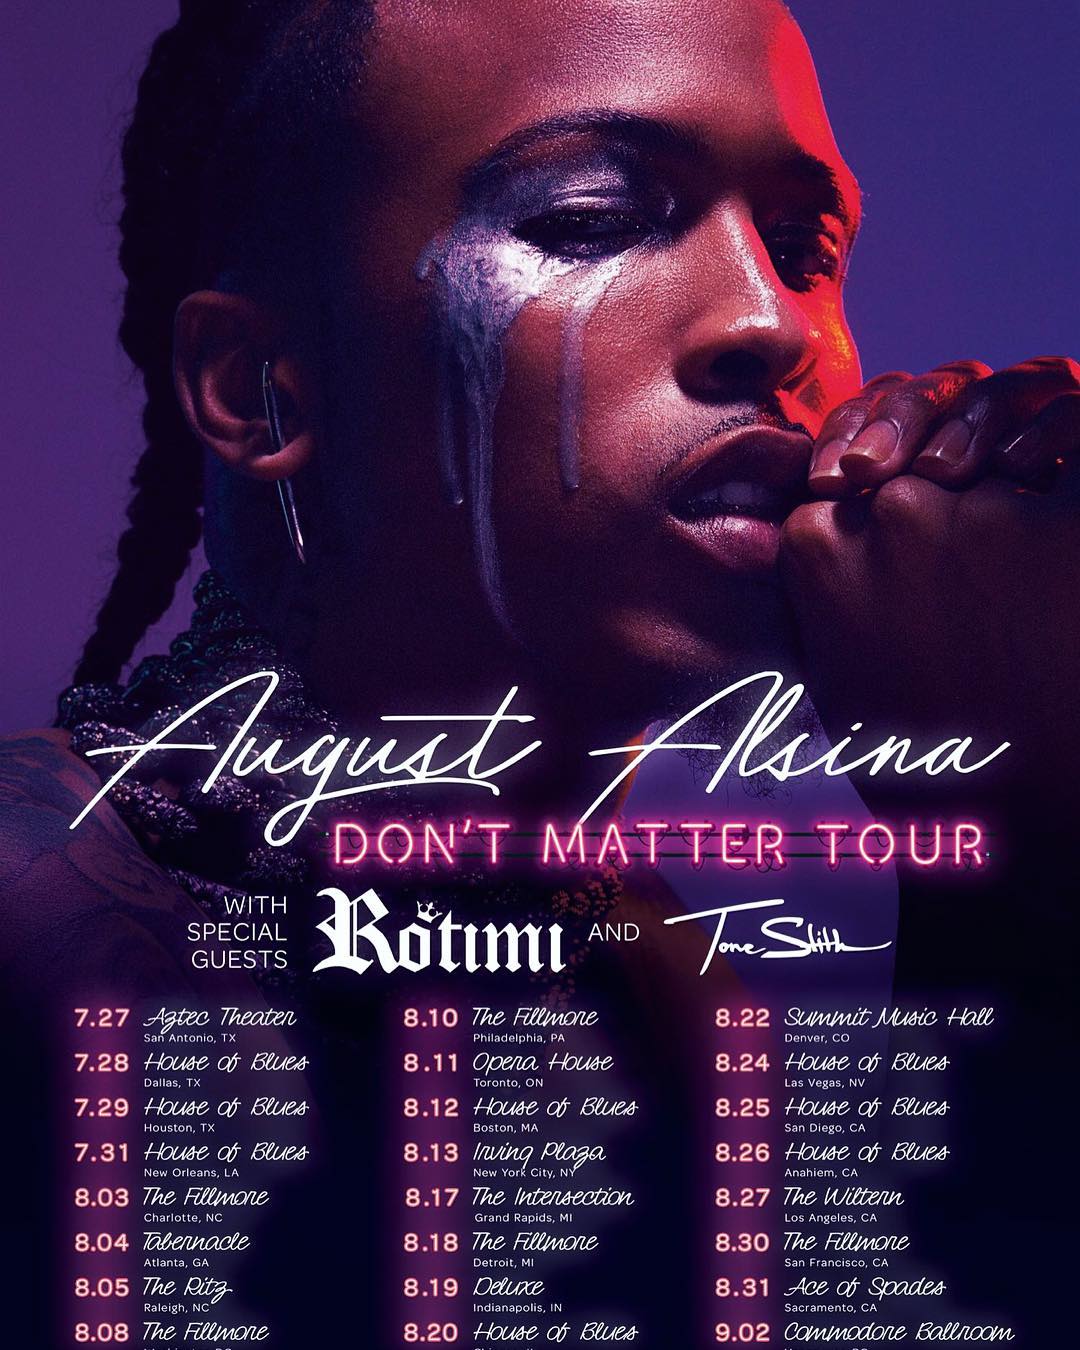 August Alsina Announces 'Don't Matter Tour' With Rotimi & Tone Stith | HipHop-N-More1080 x 1350